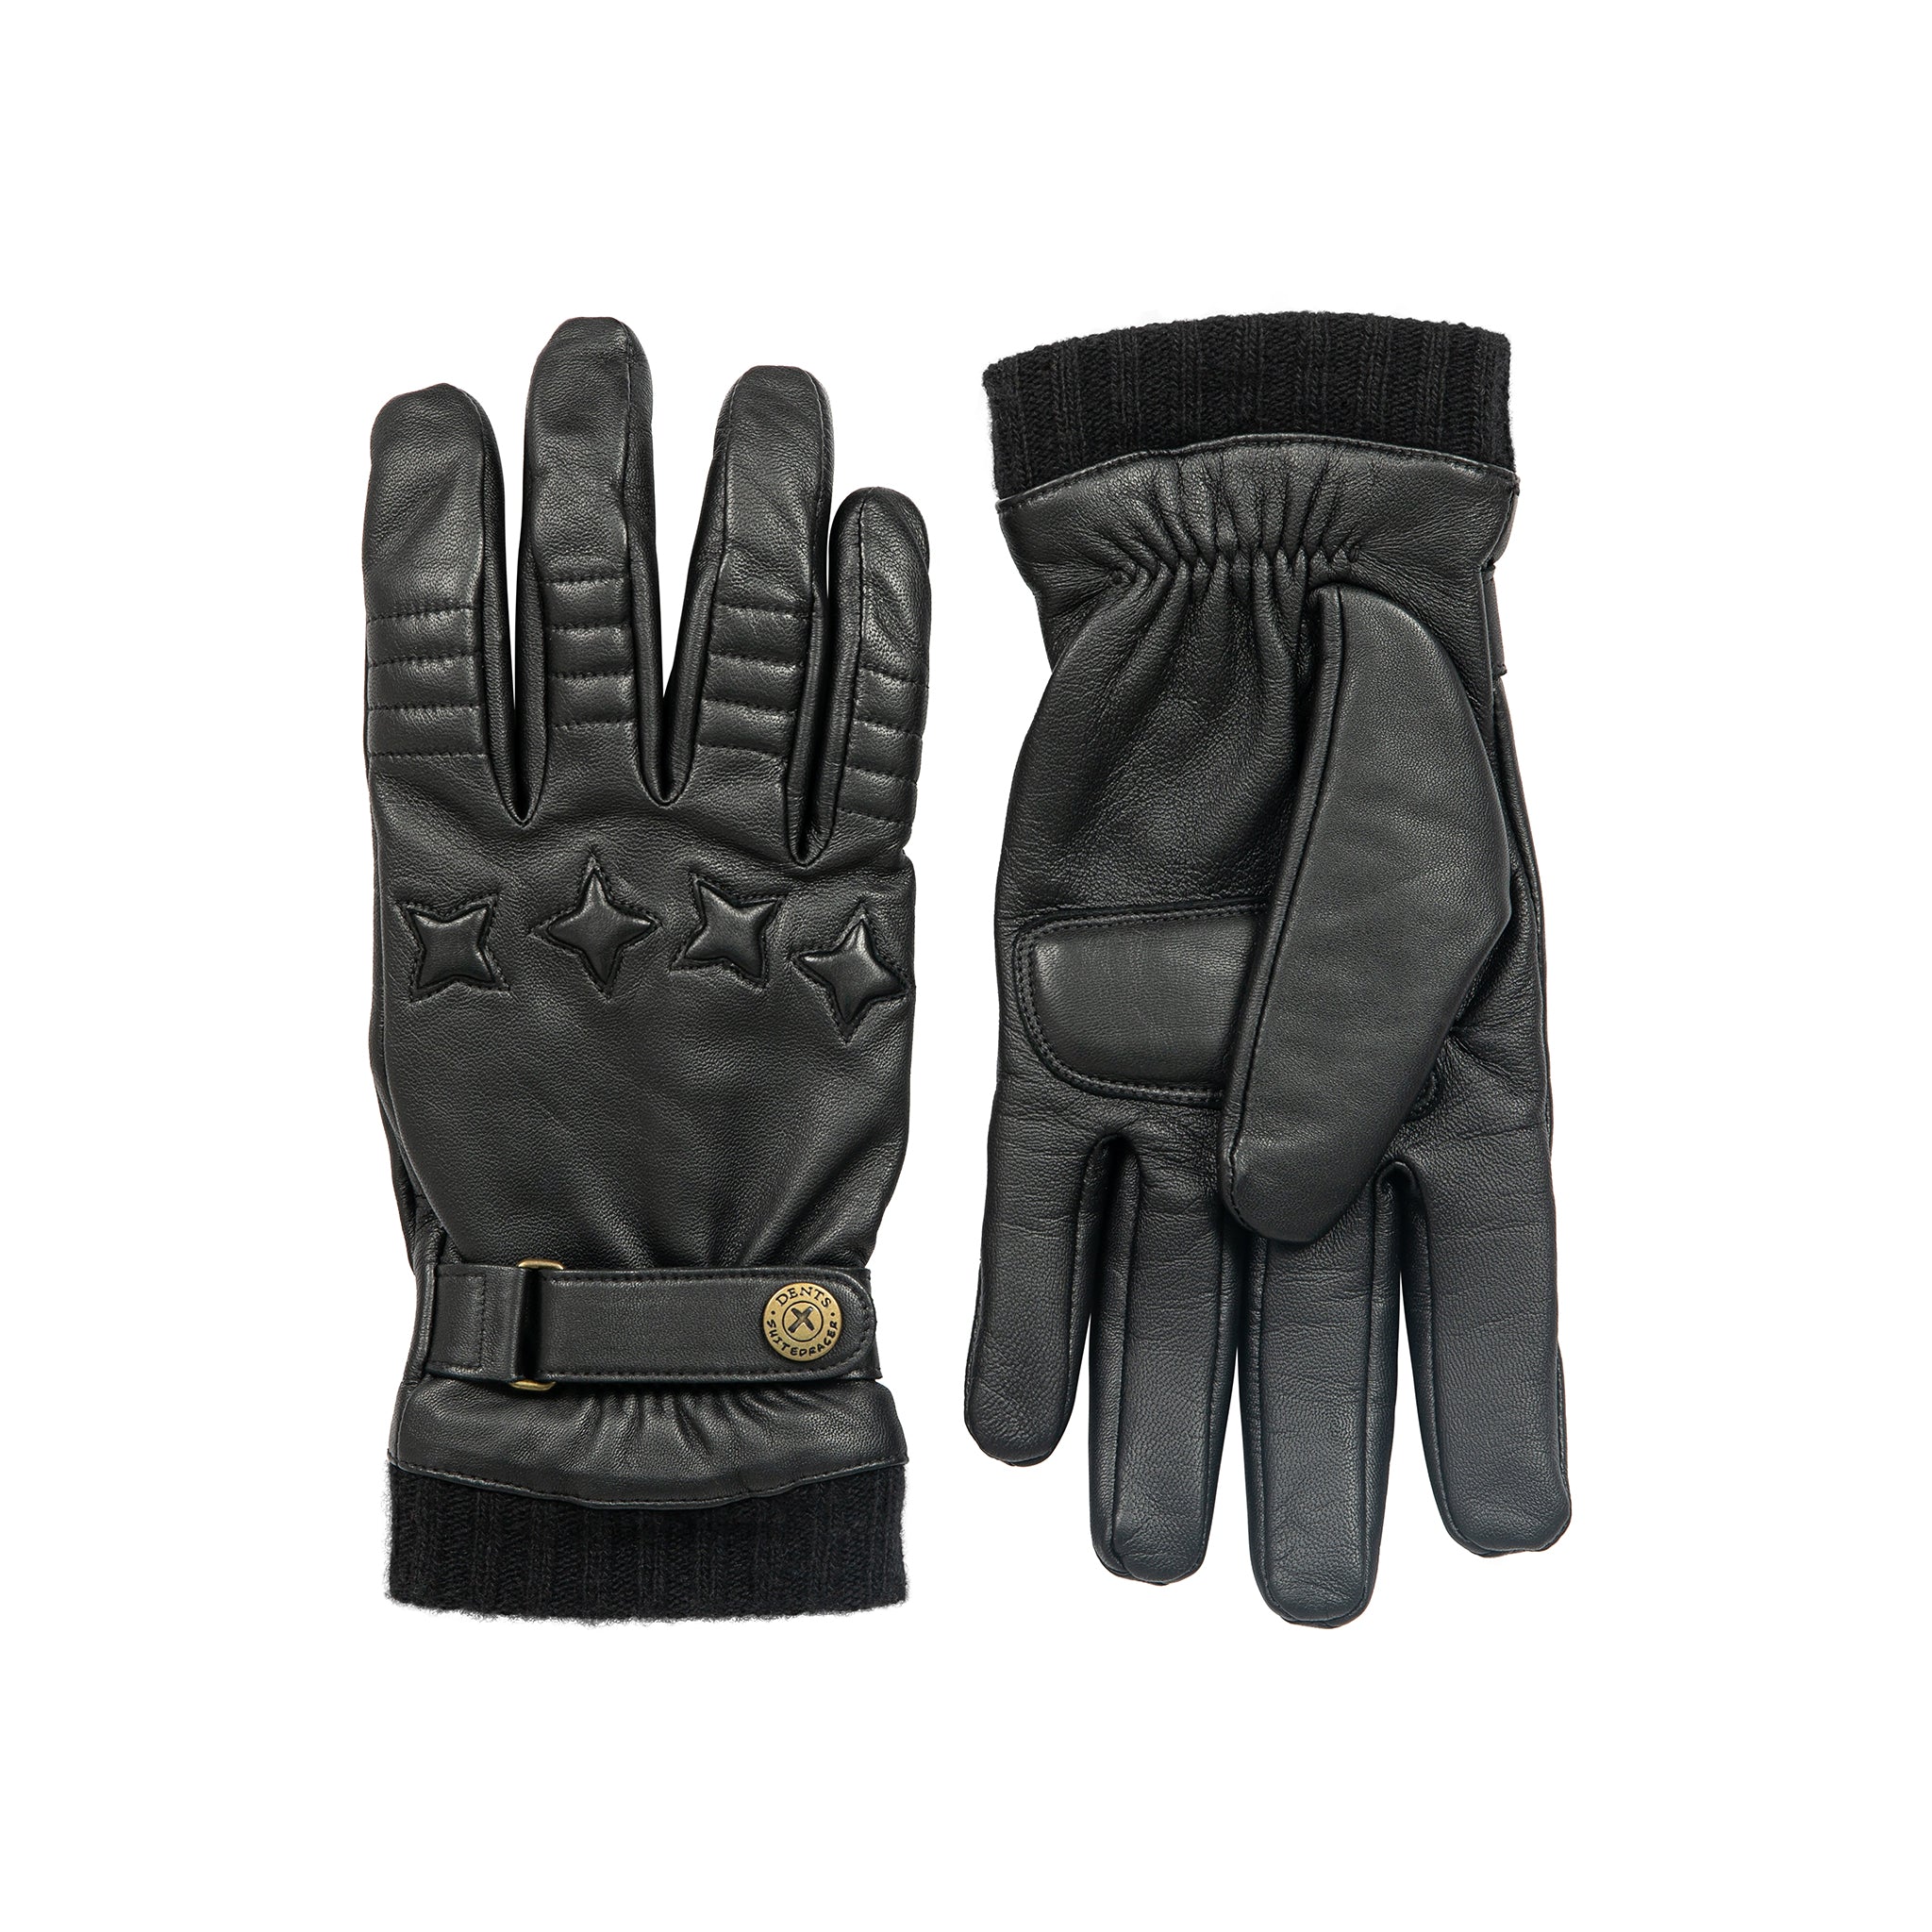 Men's The Suited Racer Touchscreen Cashmere-Lined Leather Driving Gloves, M / Black